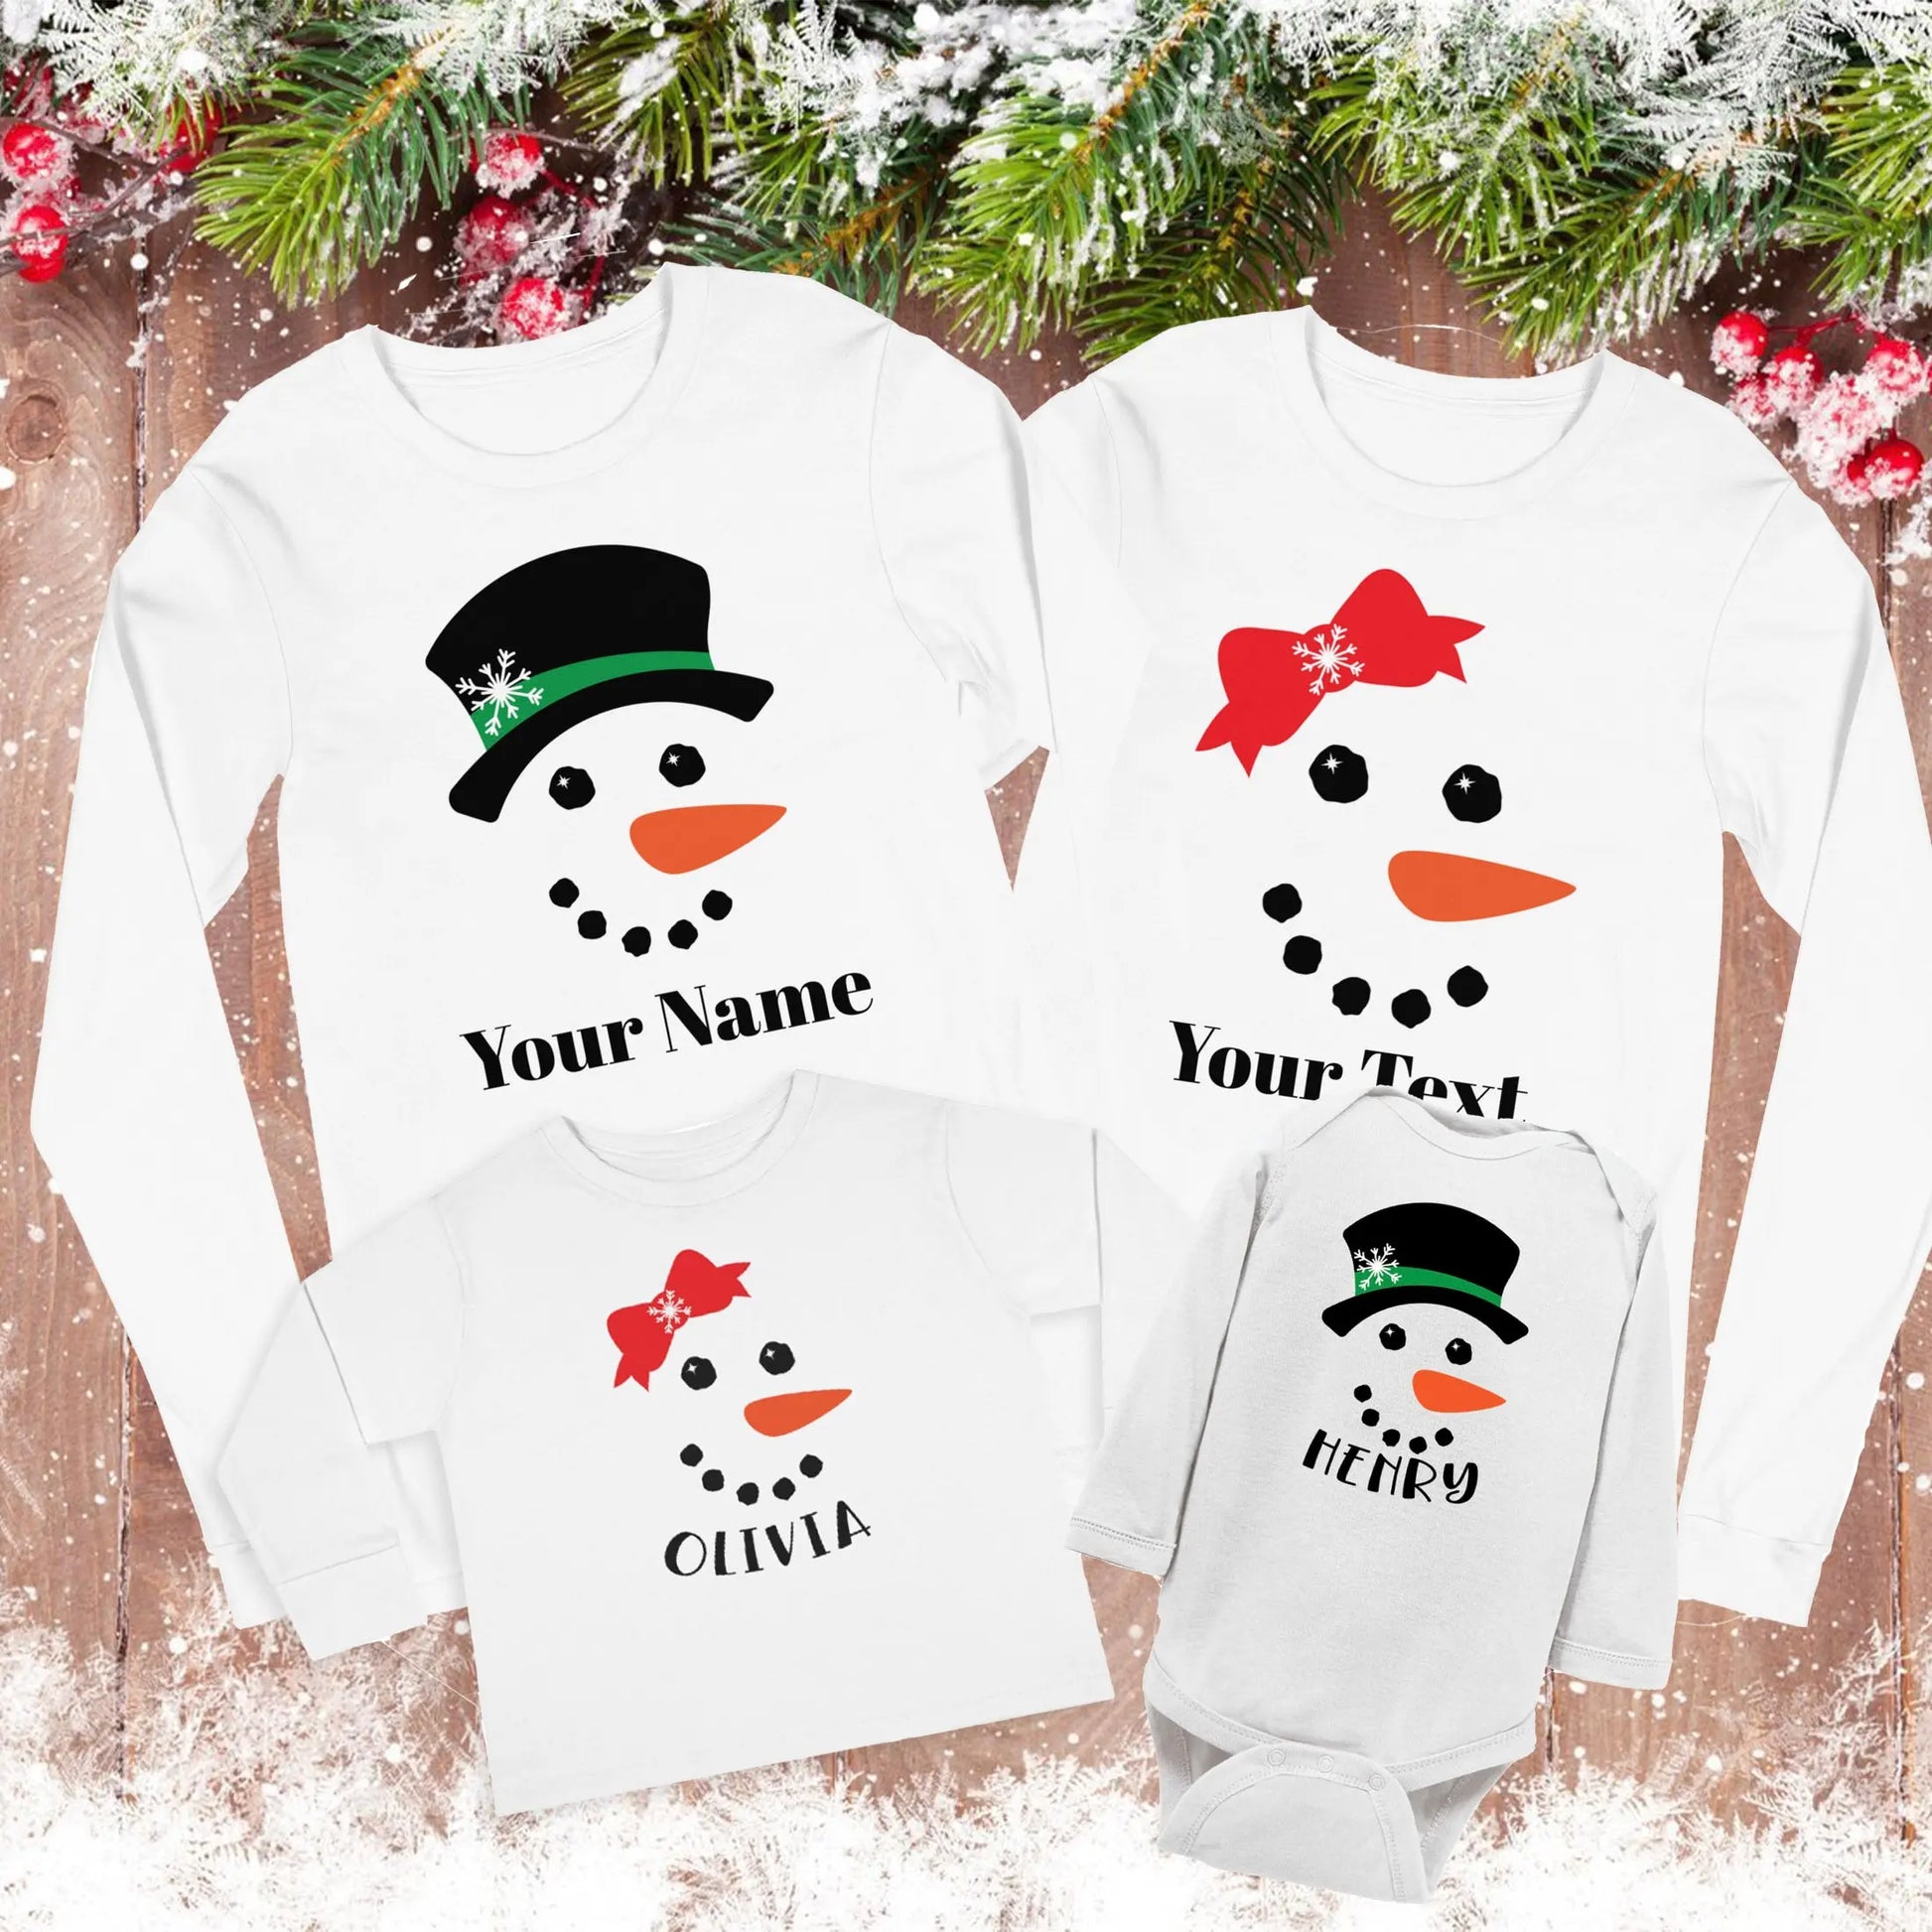 Snowman Personalized Youth Long Sleeve Tee Amazing Faith Designs